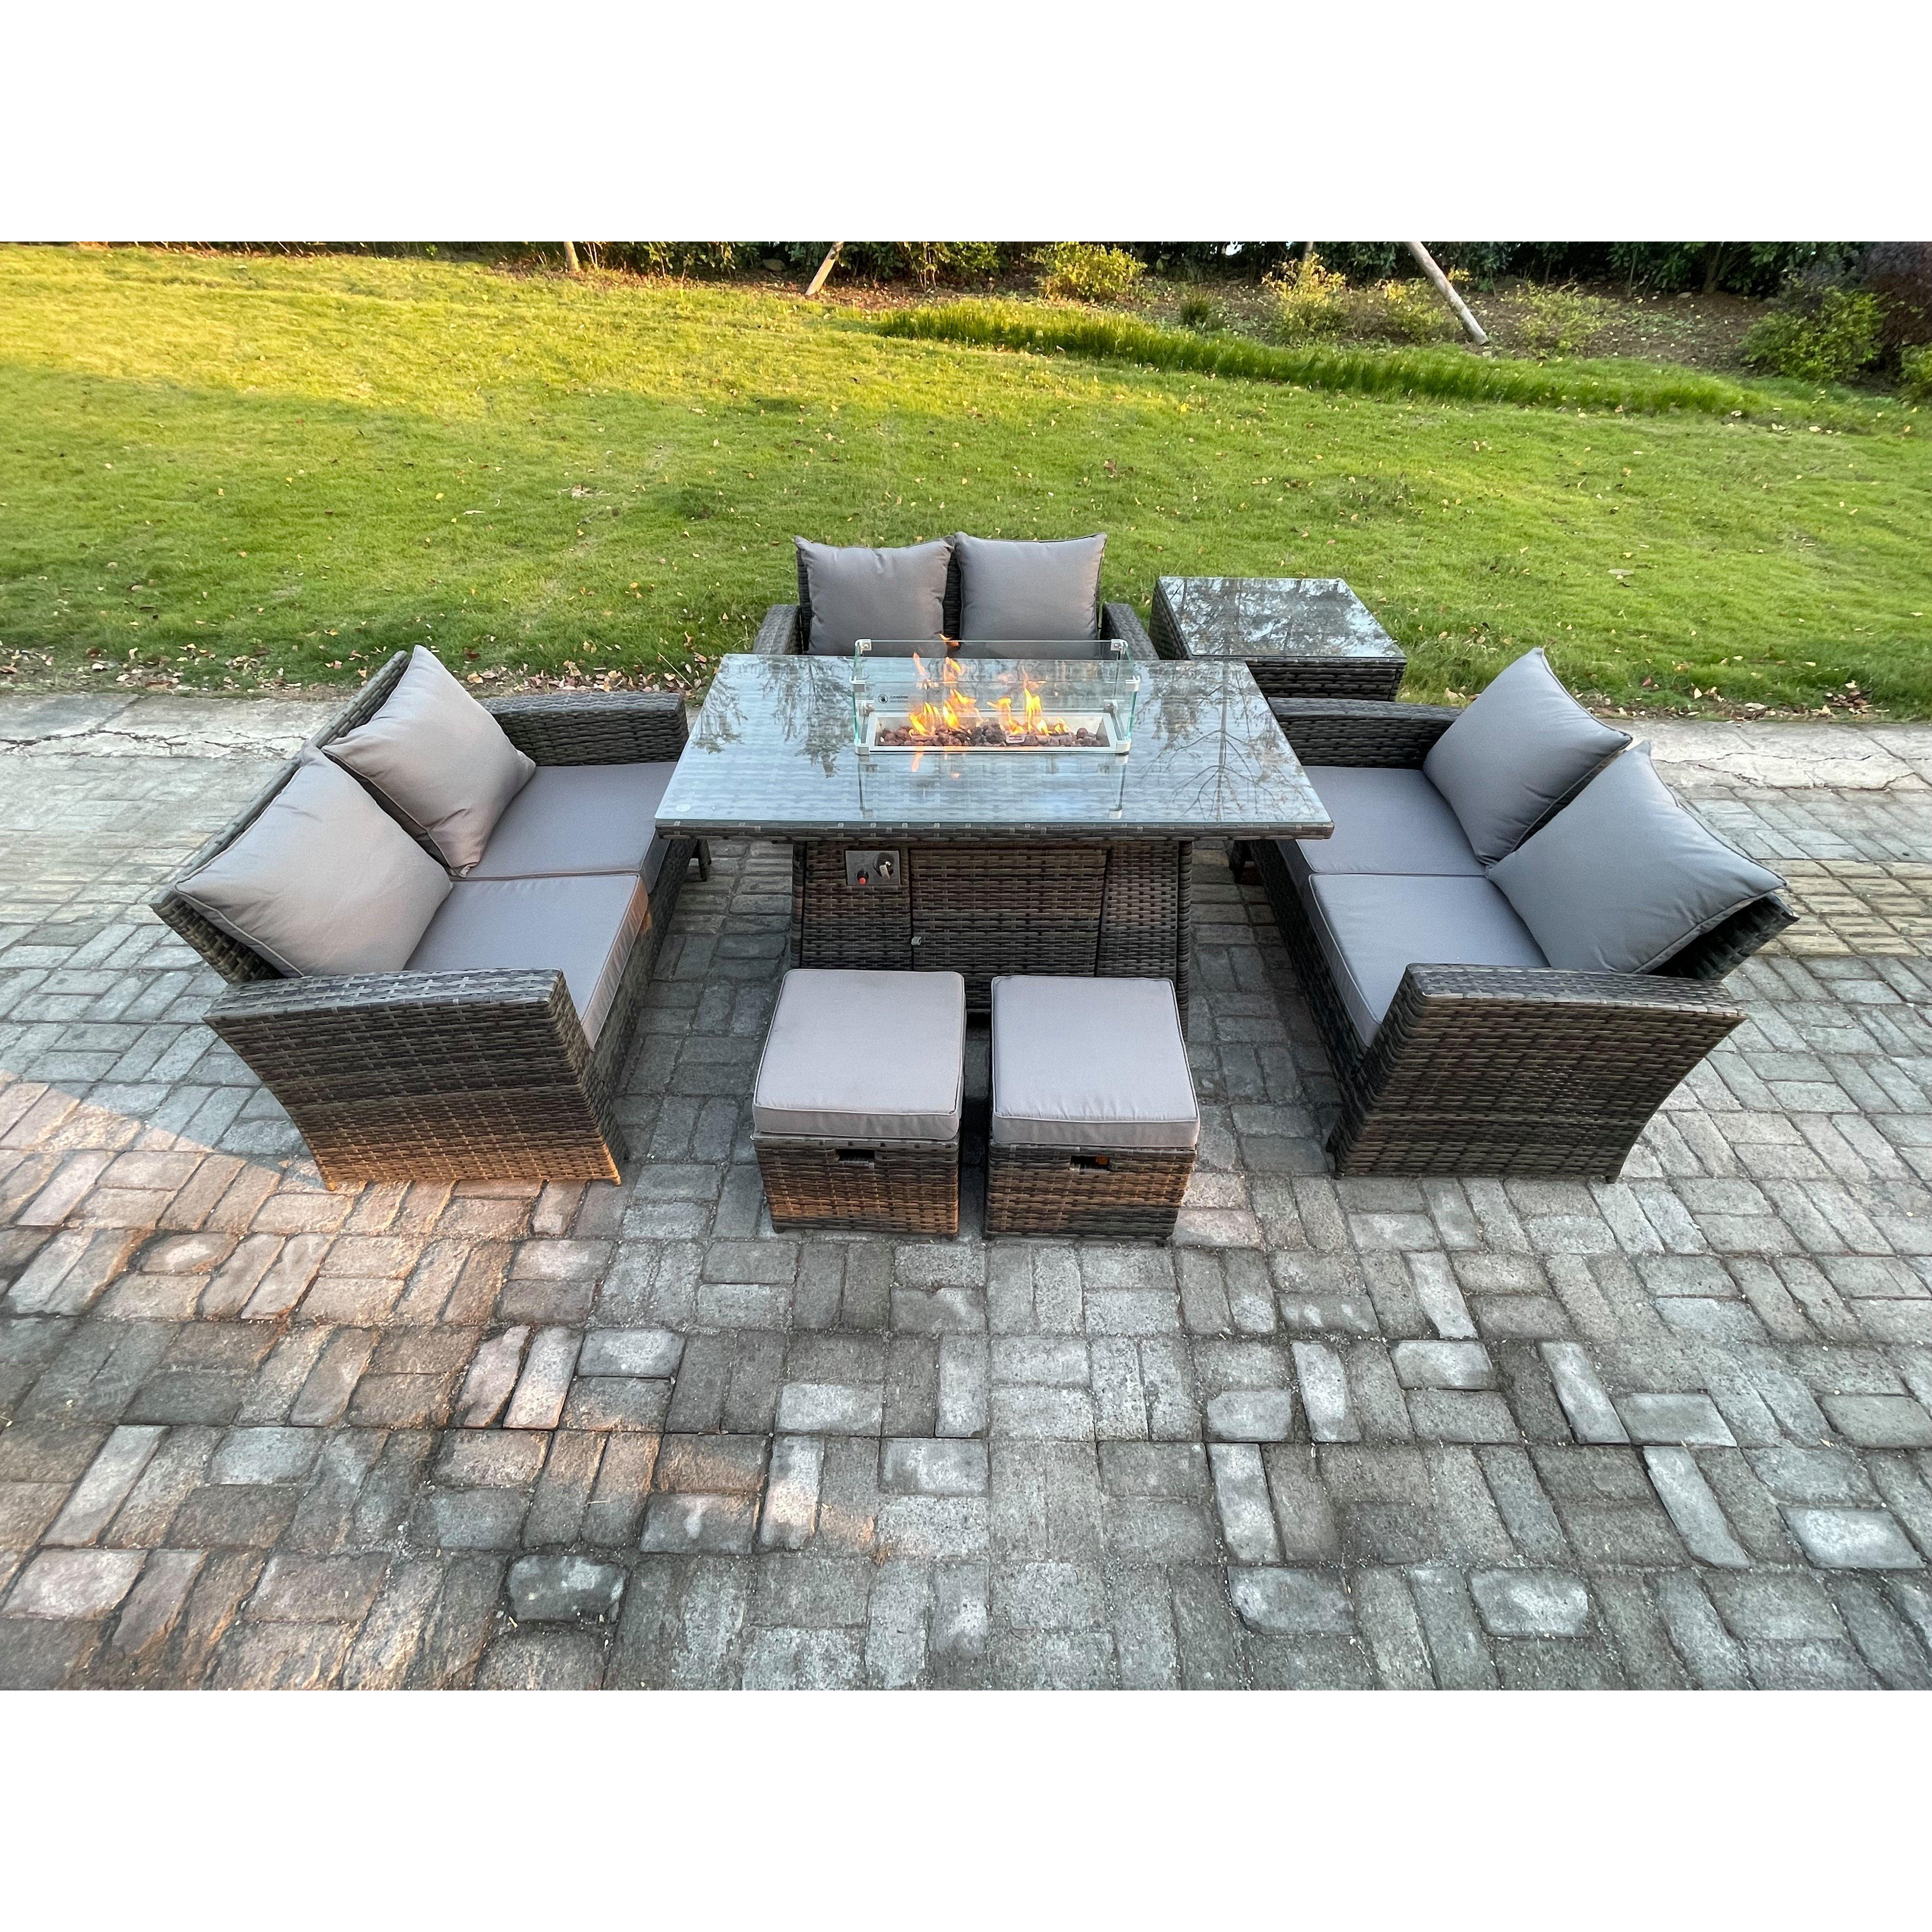 High Back Rattan Garden Furniture Sofa Sets with Outdoor Furniture Gas Firepit Dining Table Set Side Table 2 Small Footstools - image 1